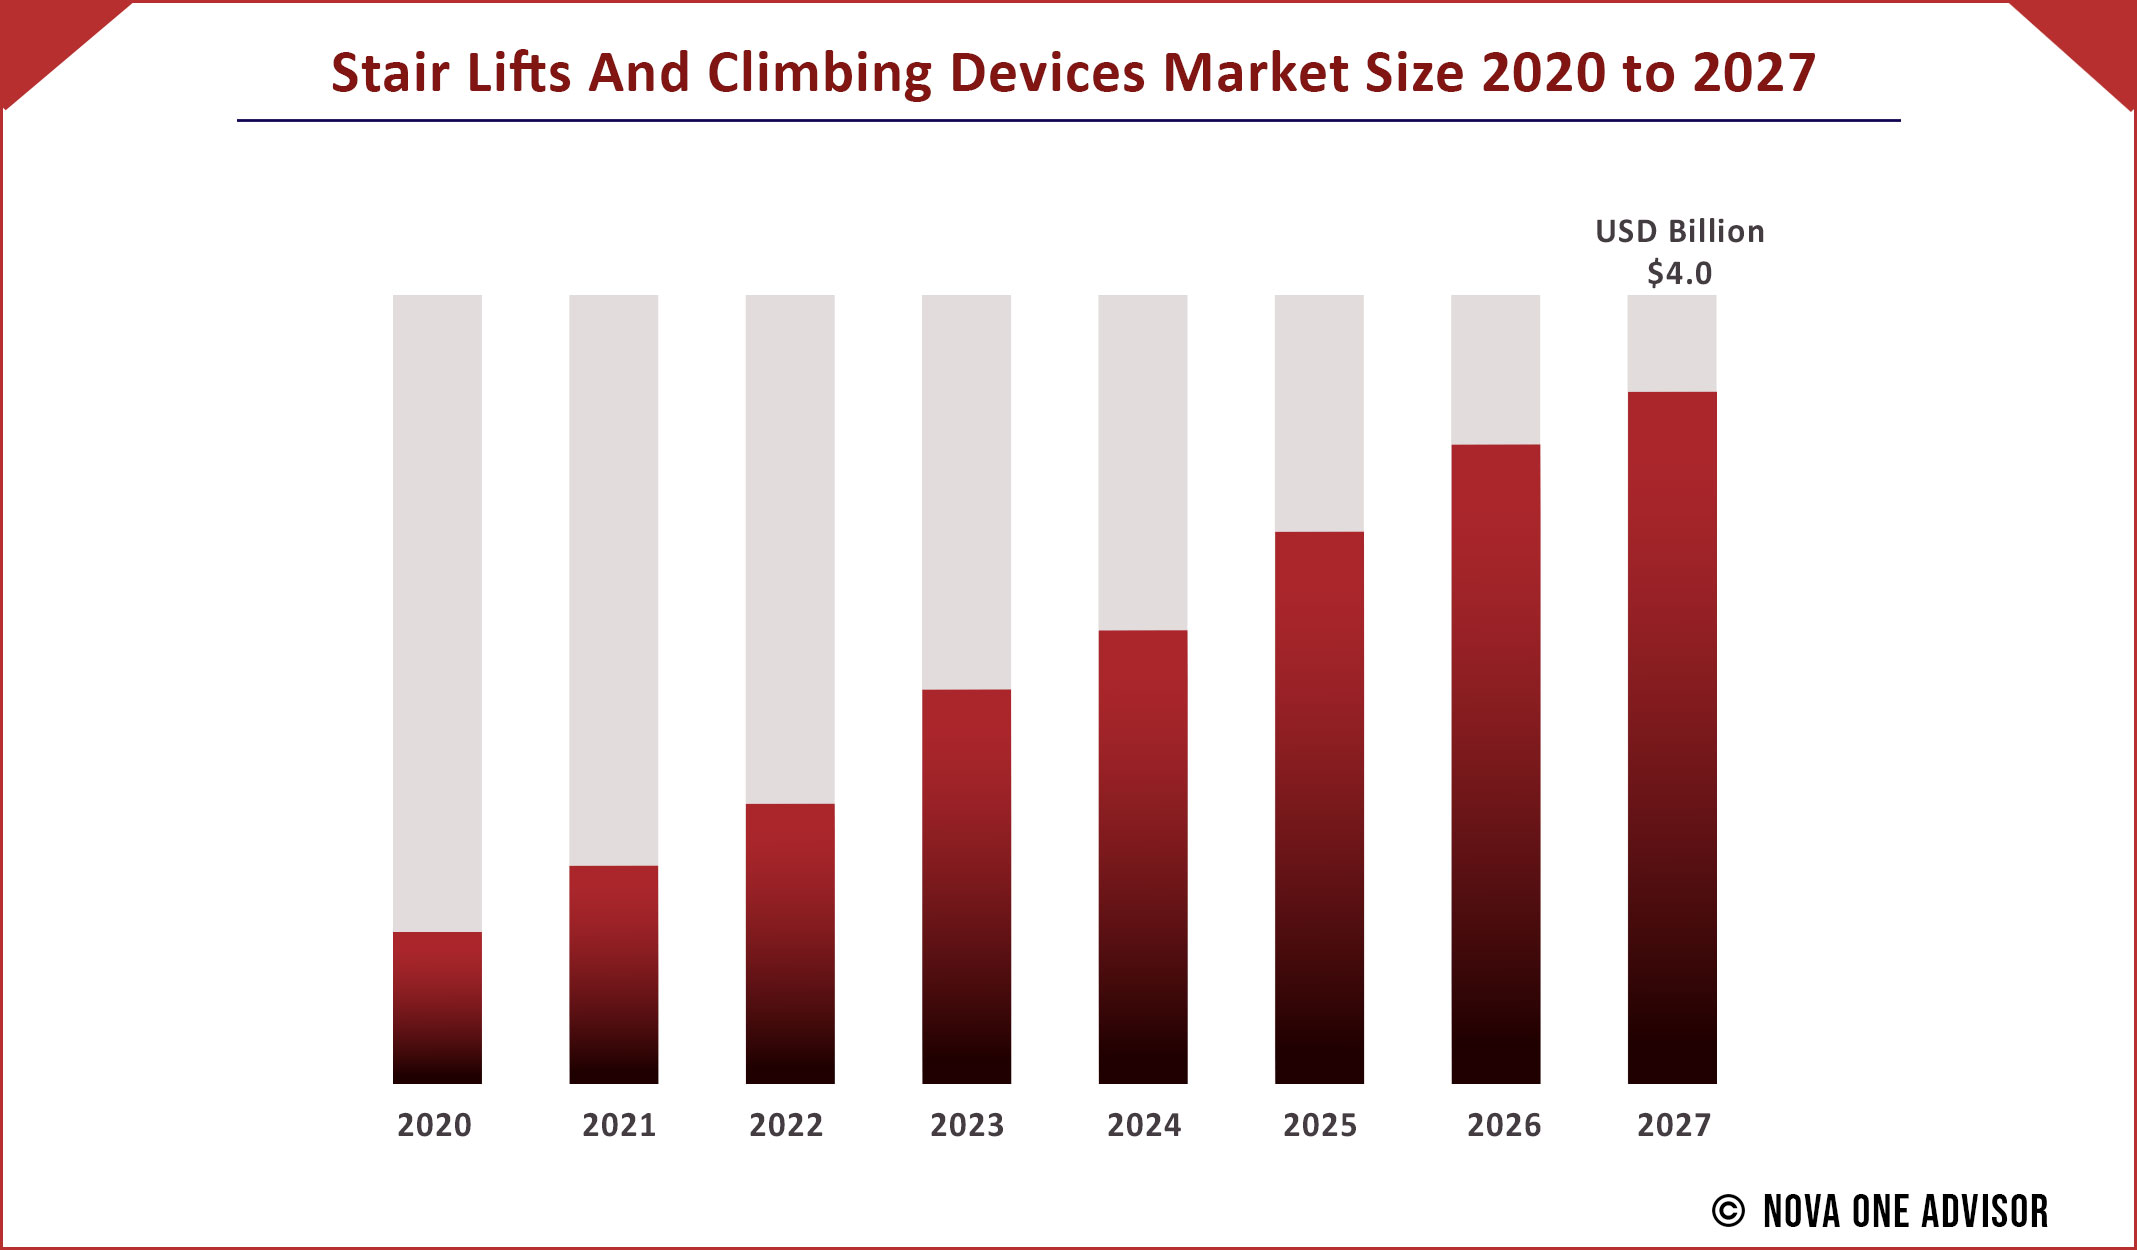 Stair Lifts And Climbing Devices Market Size 2020 to 2027